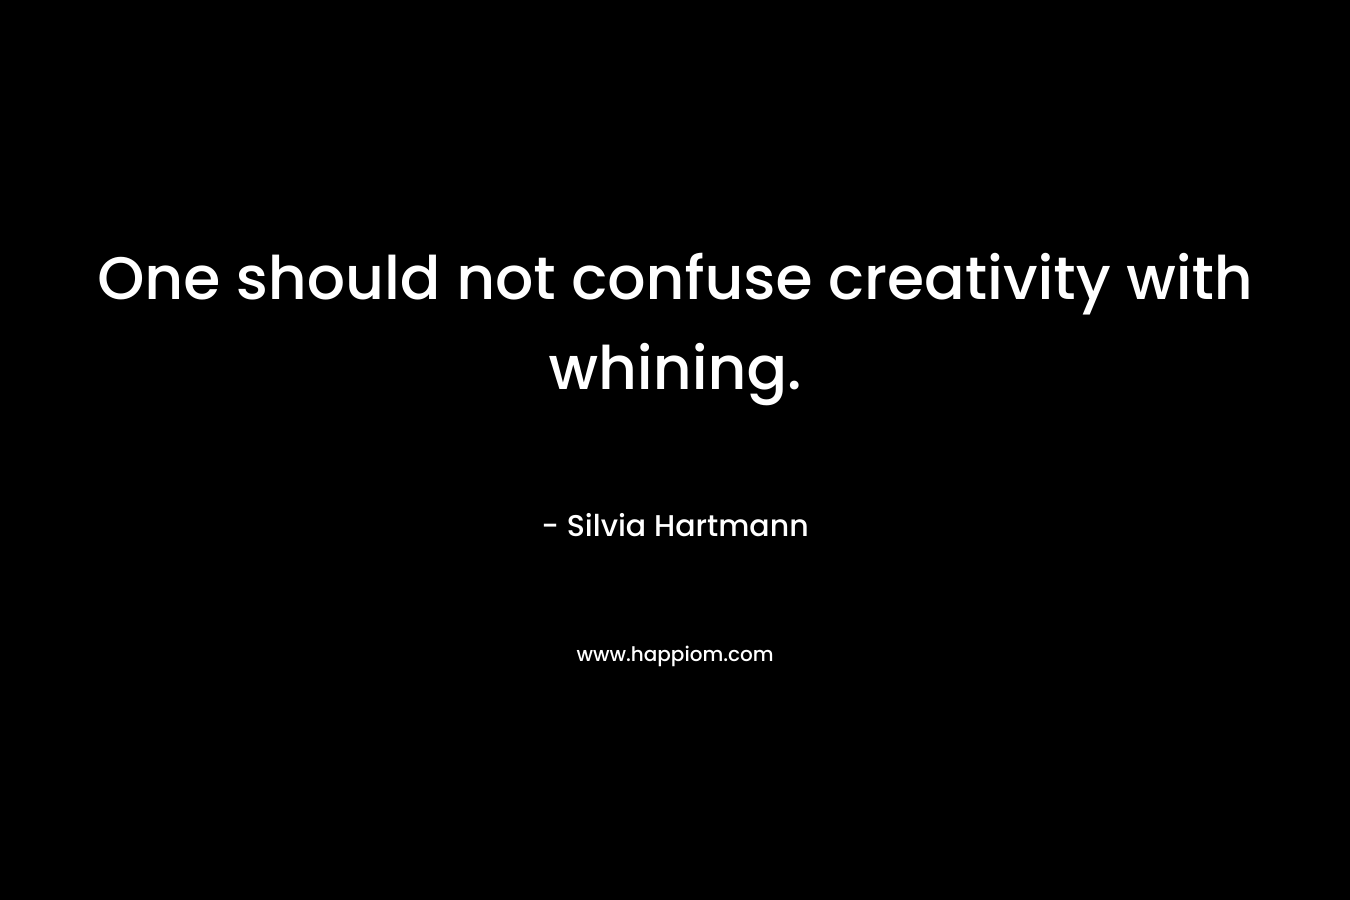 One should not confuse creativity with whining. – Silvia Hartmann